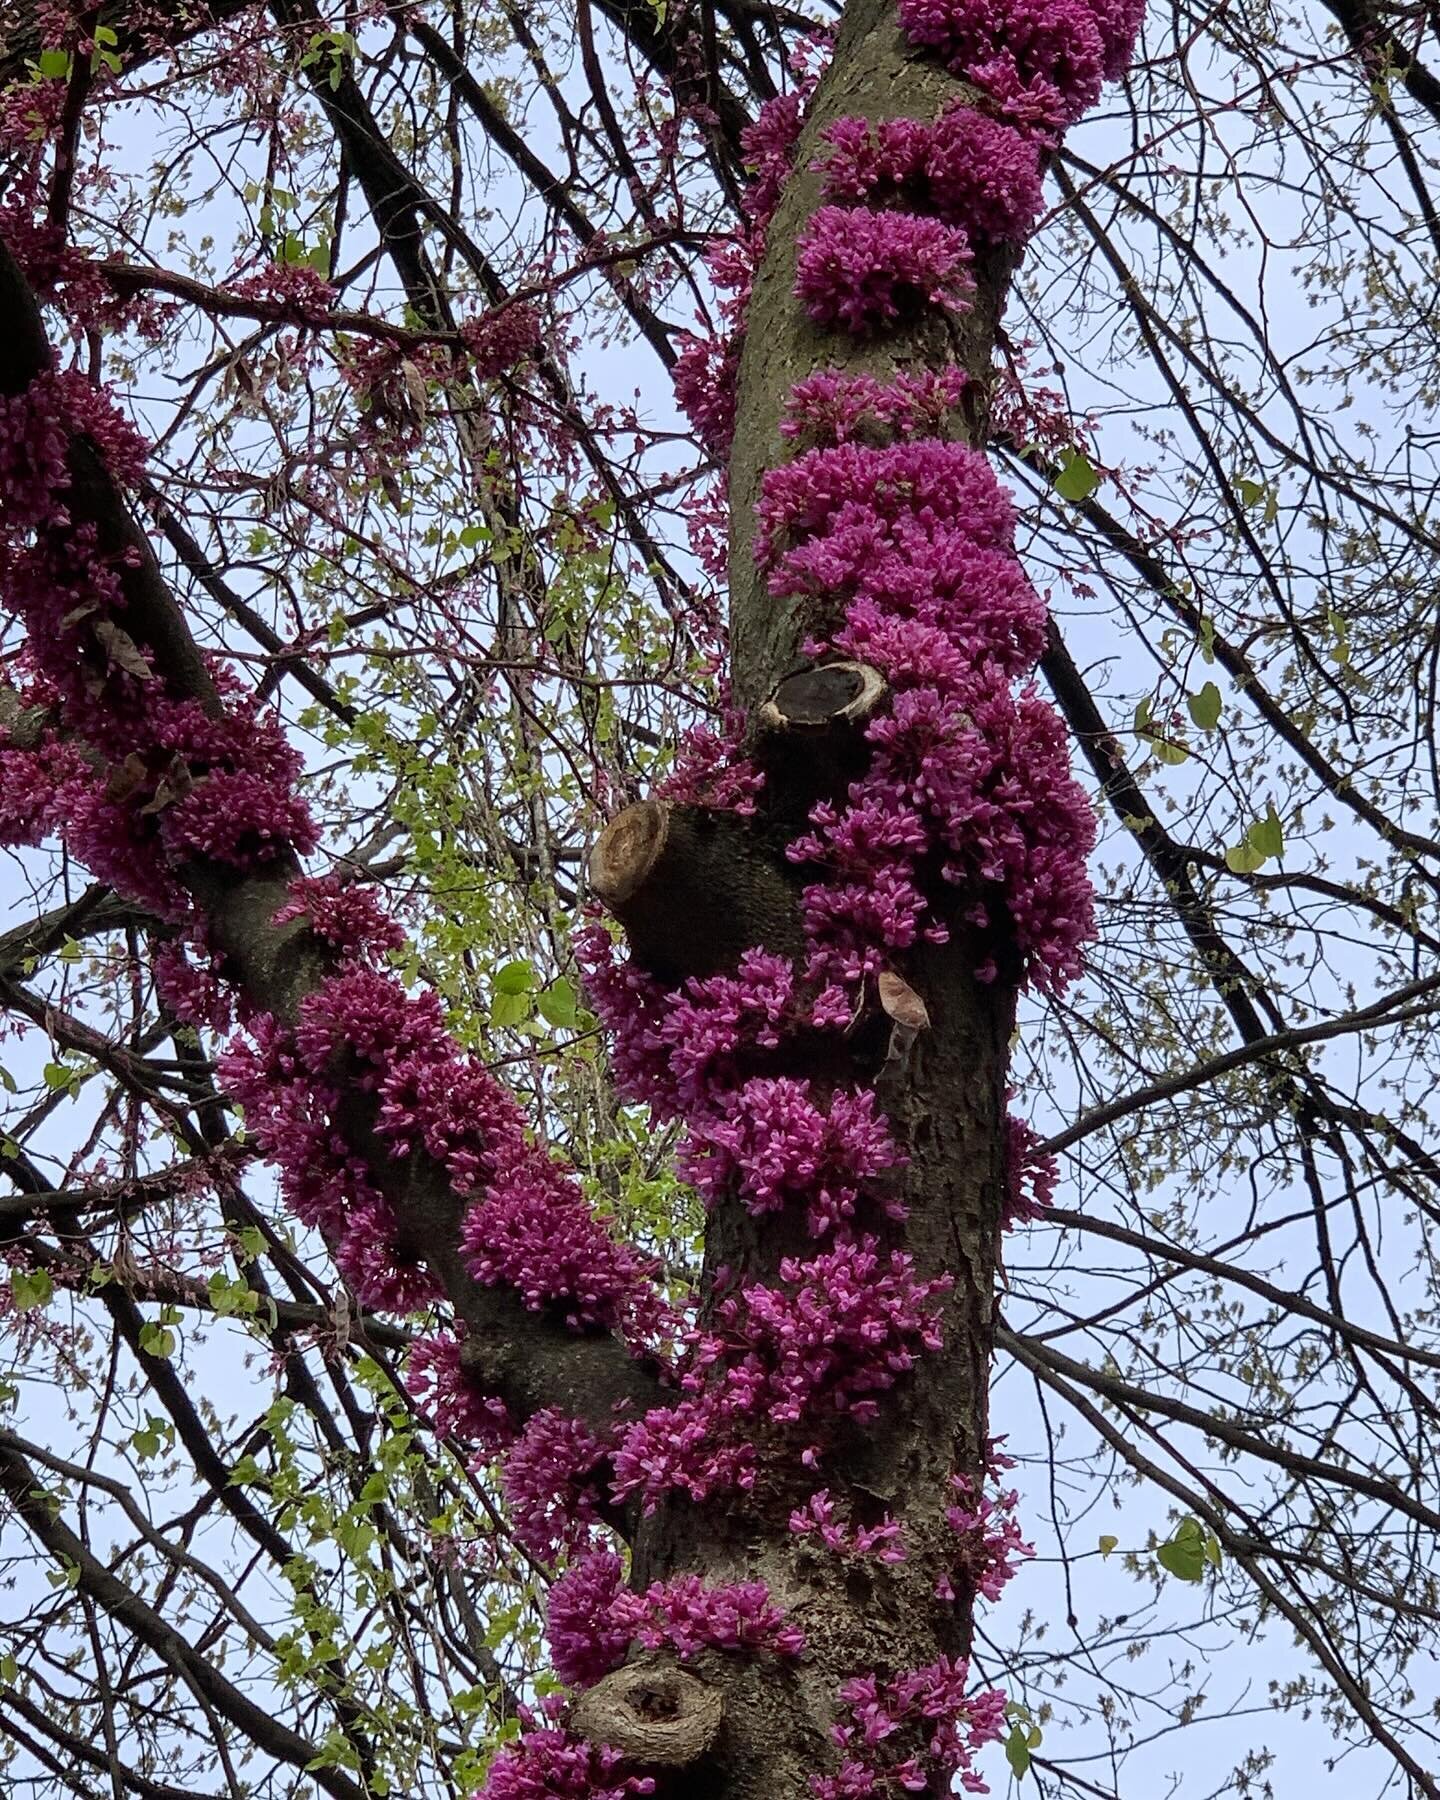 Spectacular redbud trees this year.